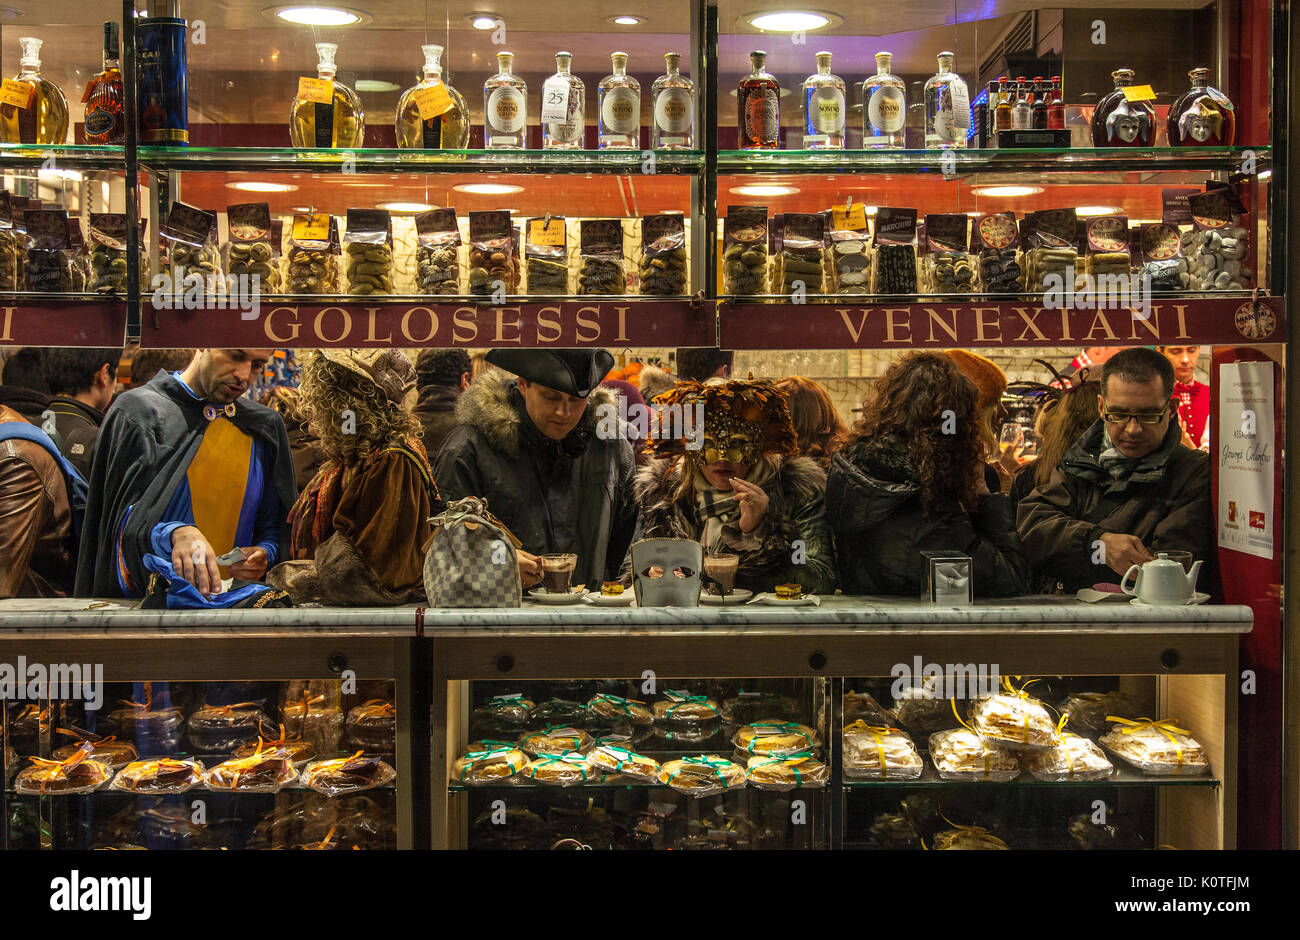 Venice,Italy- February 18, 2012: People wearing various masks enjoy a coffee break in a small Venetian Cafe during the days of Venice Carnival. Stock Photo